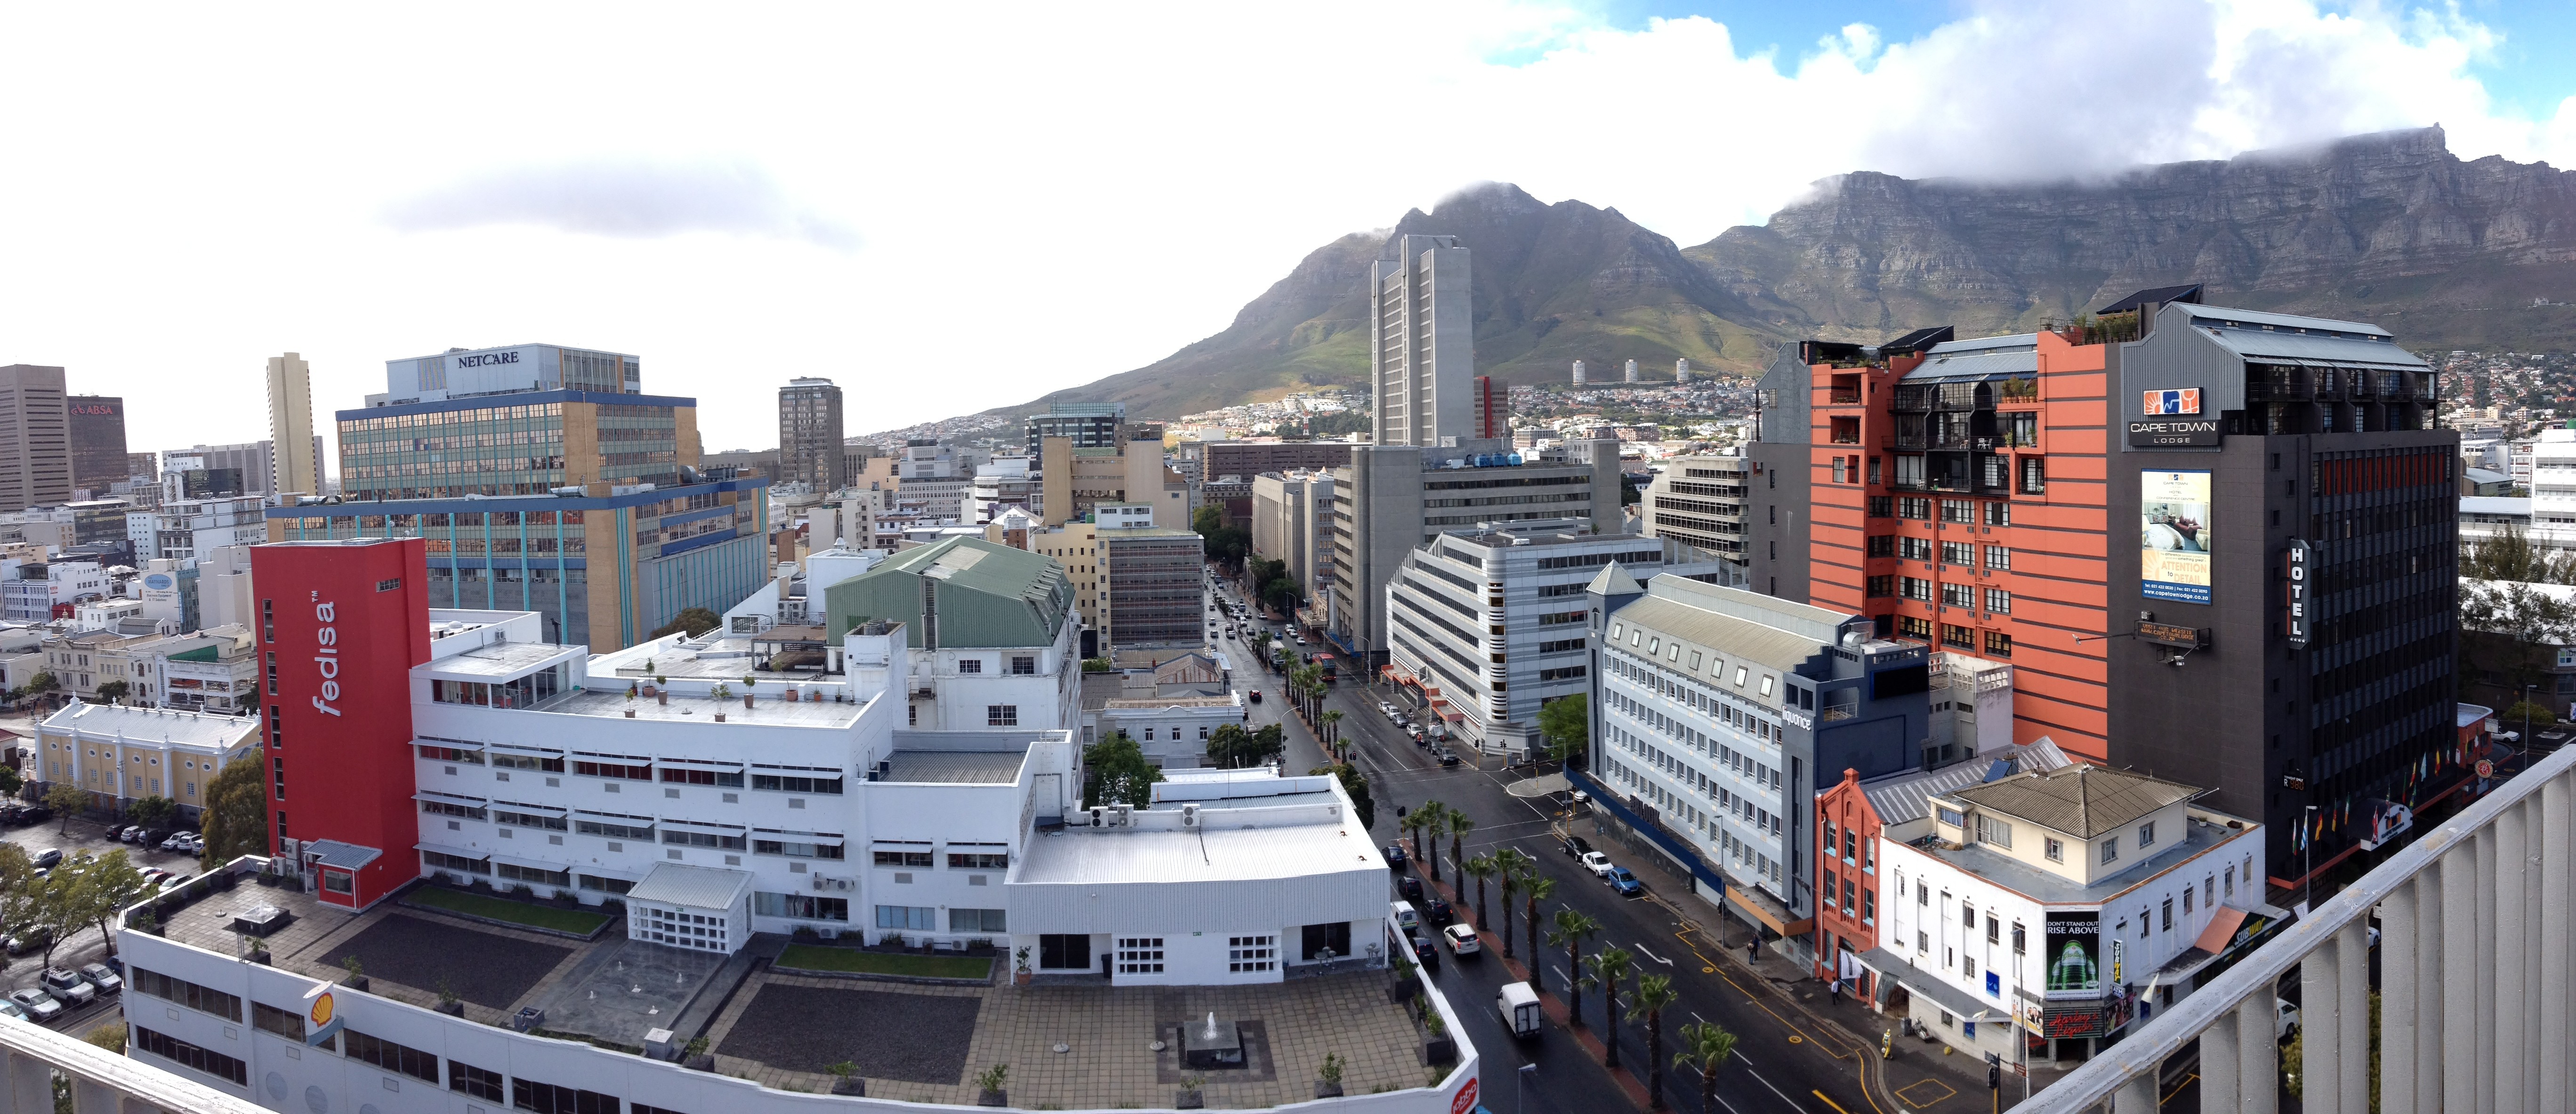 The City of Cape Town: Interesting Facts About The Mother City